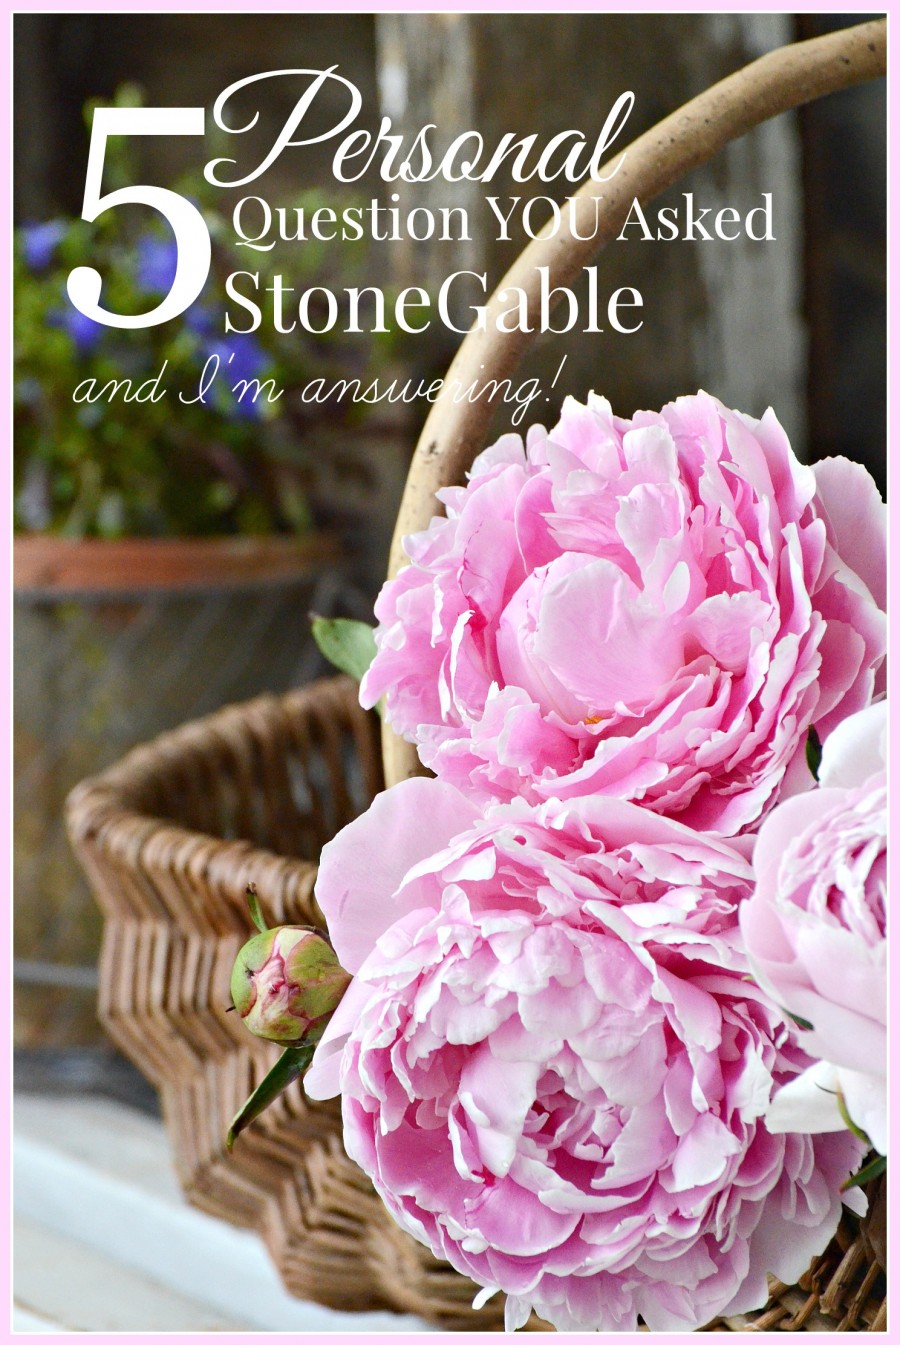 5 PERSONAL QUESTION YOU ASKED STONEGABLE- and I'm answering-stonegableblog.com